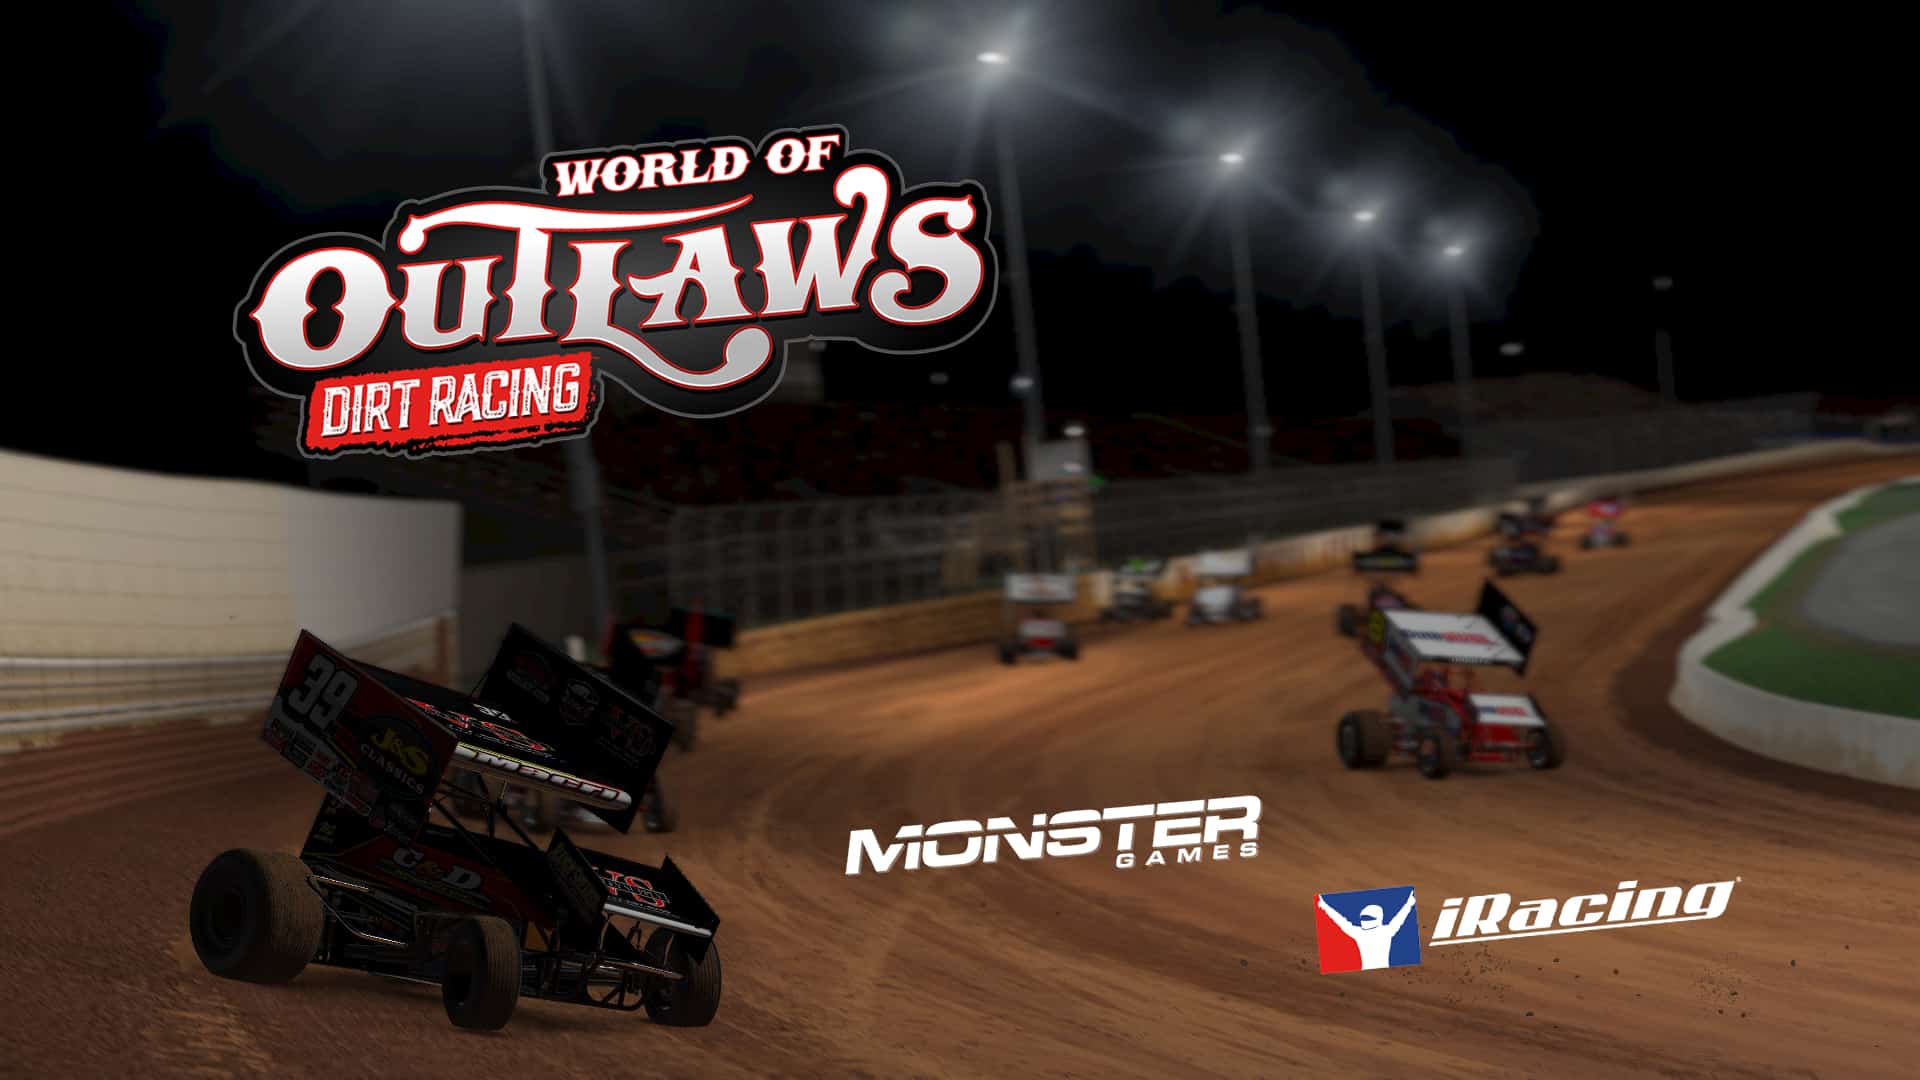 What previous Monster Games titles can tell us about World of Outlaws: Dirt Racing